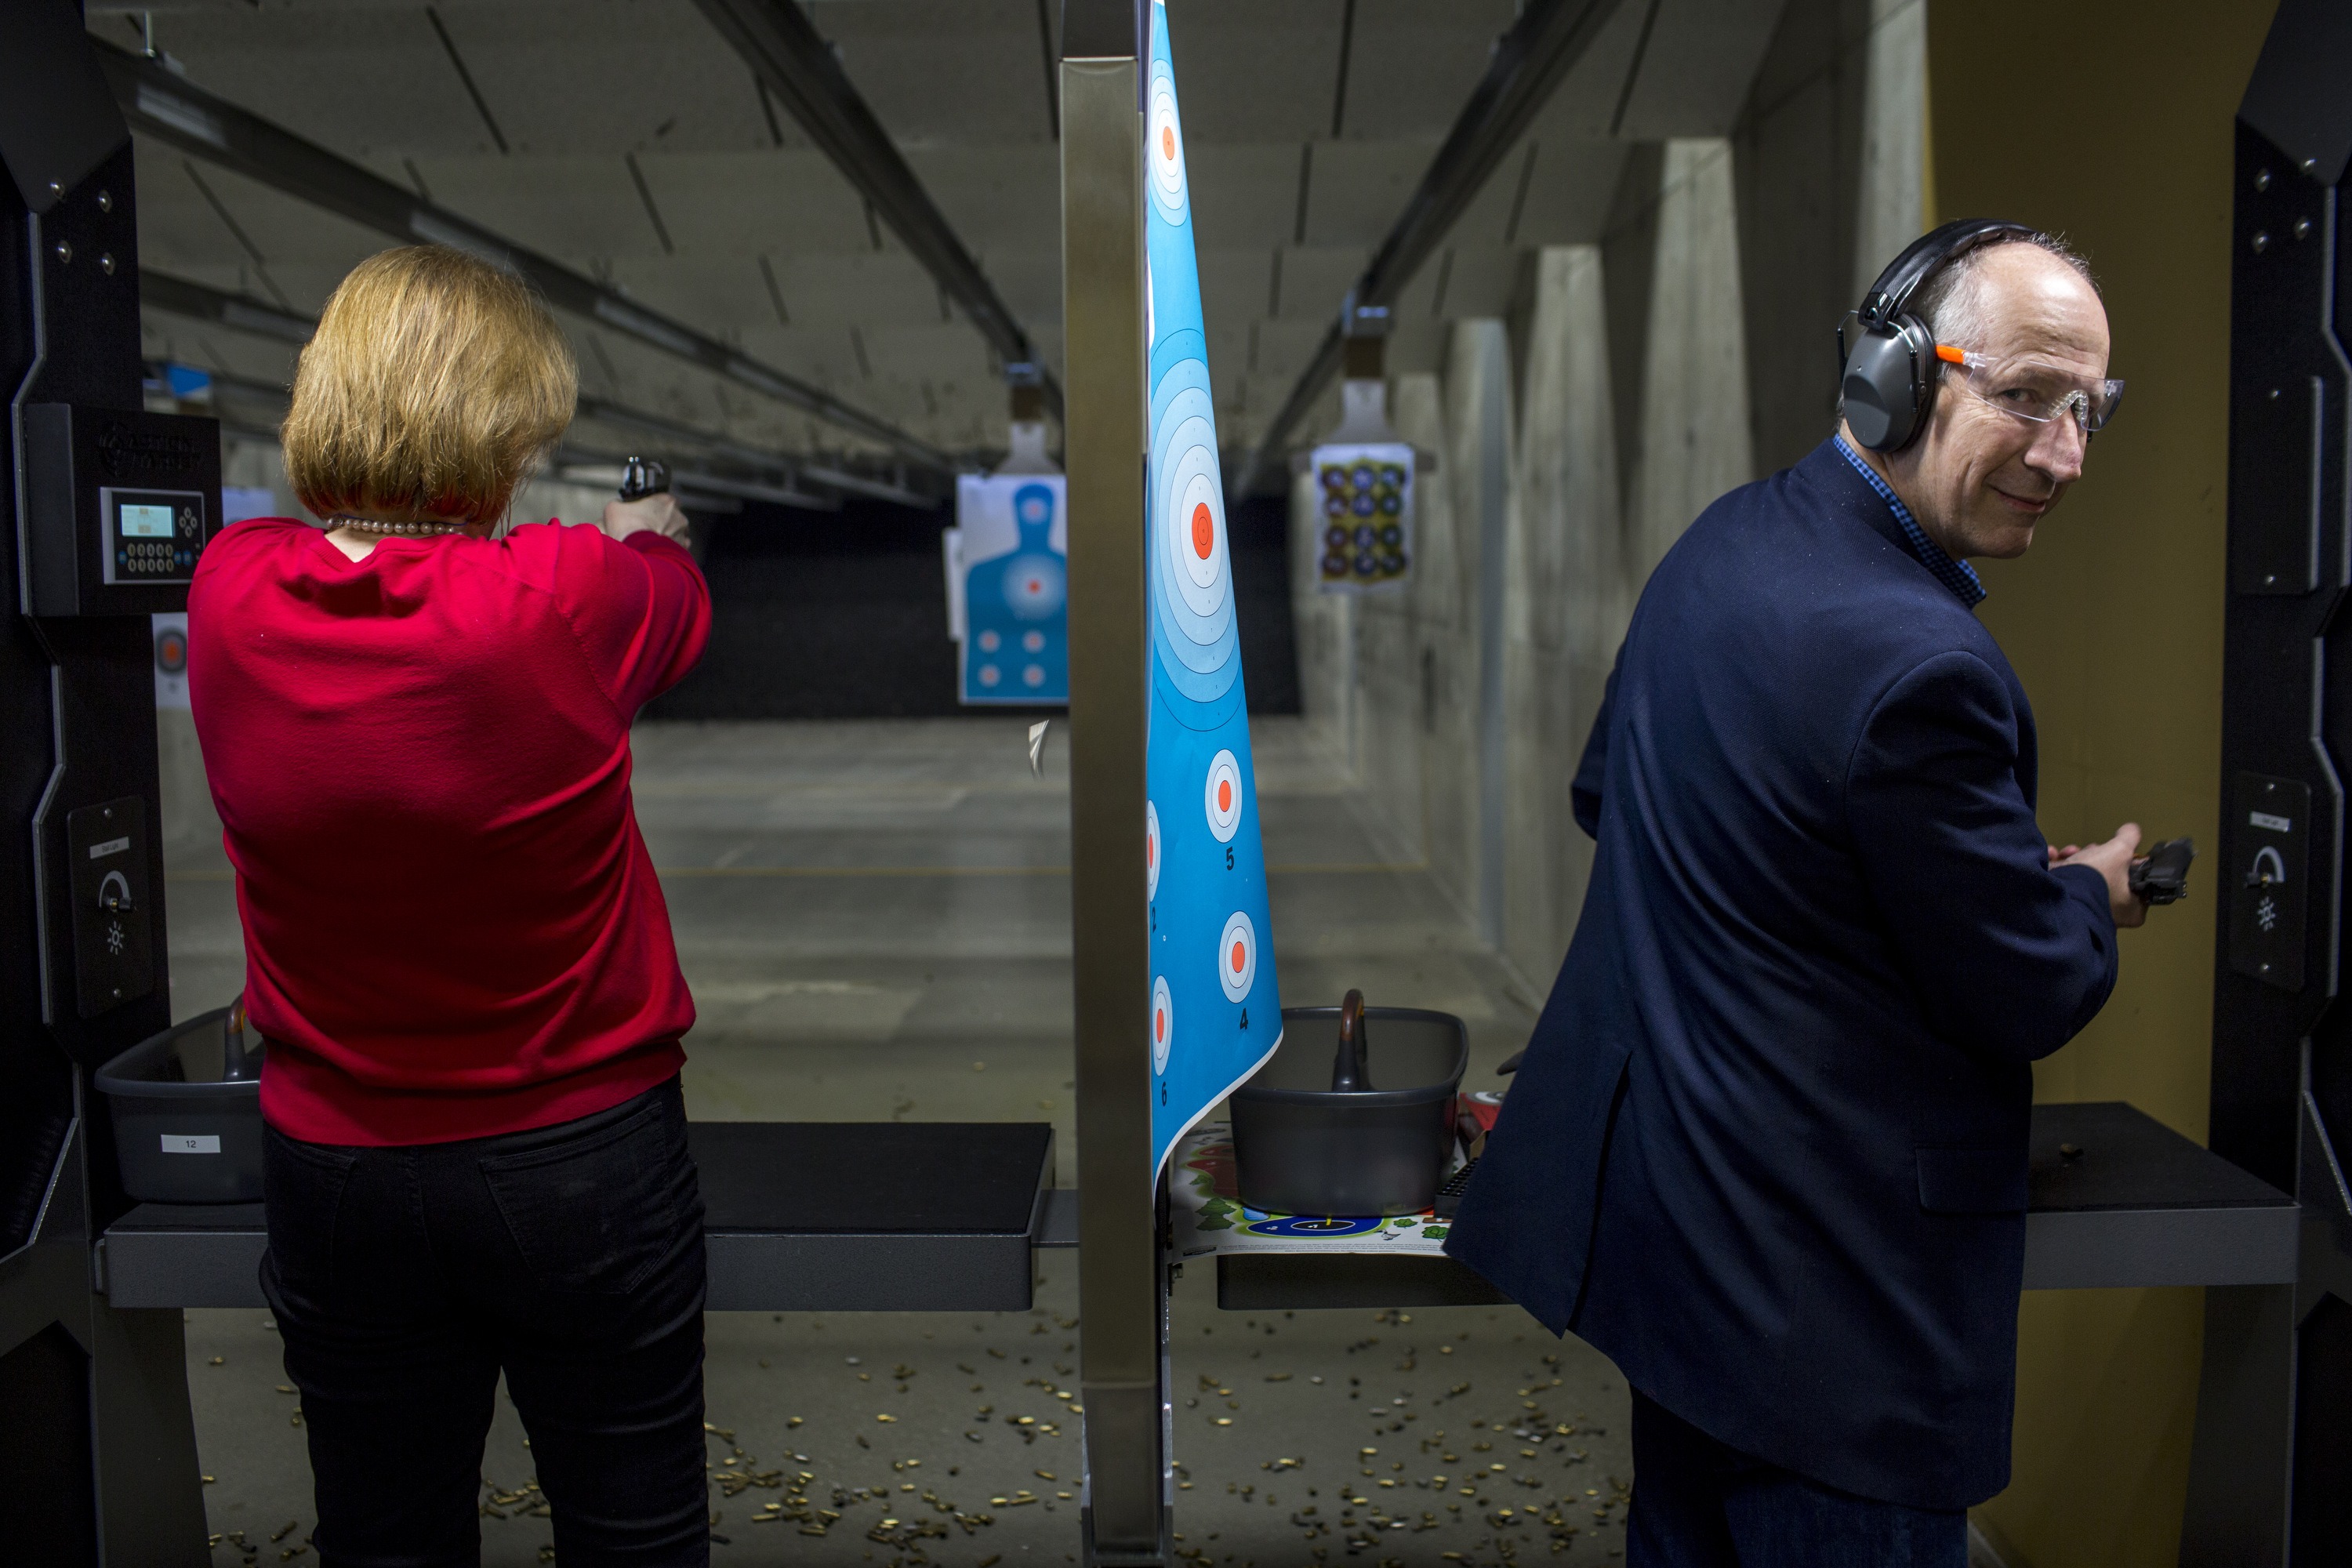 Janet Huckabee, left, attends a campaign event for her husband, Gov. Mike Huckabee at the Crossroads shooting range in Johnston, Iowa on Jan. 30, 2016.